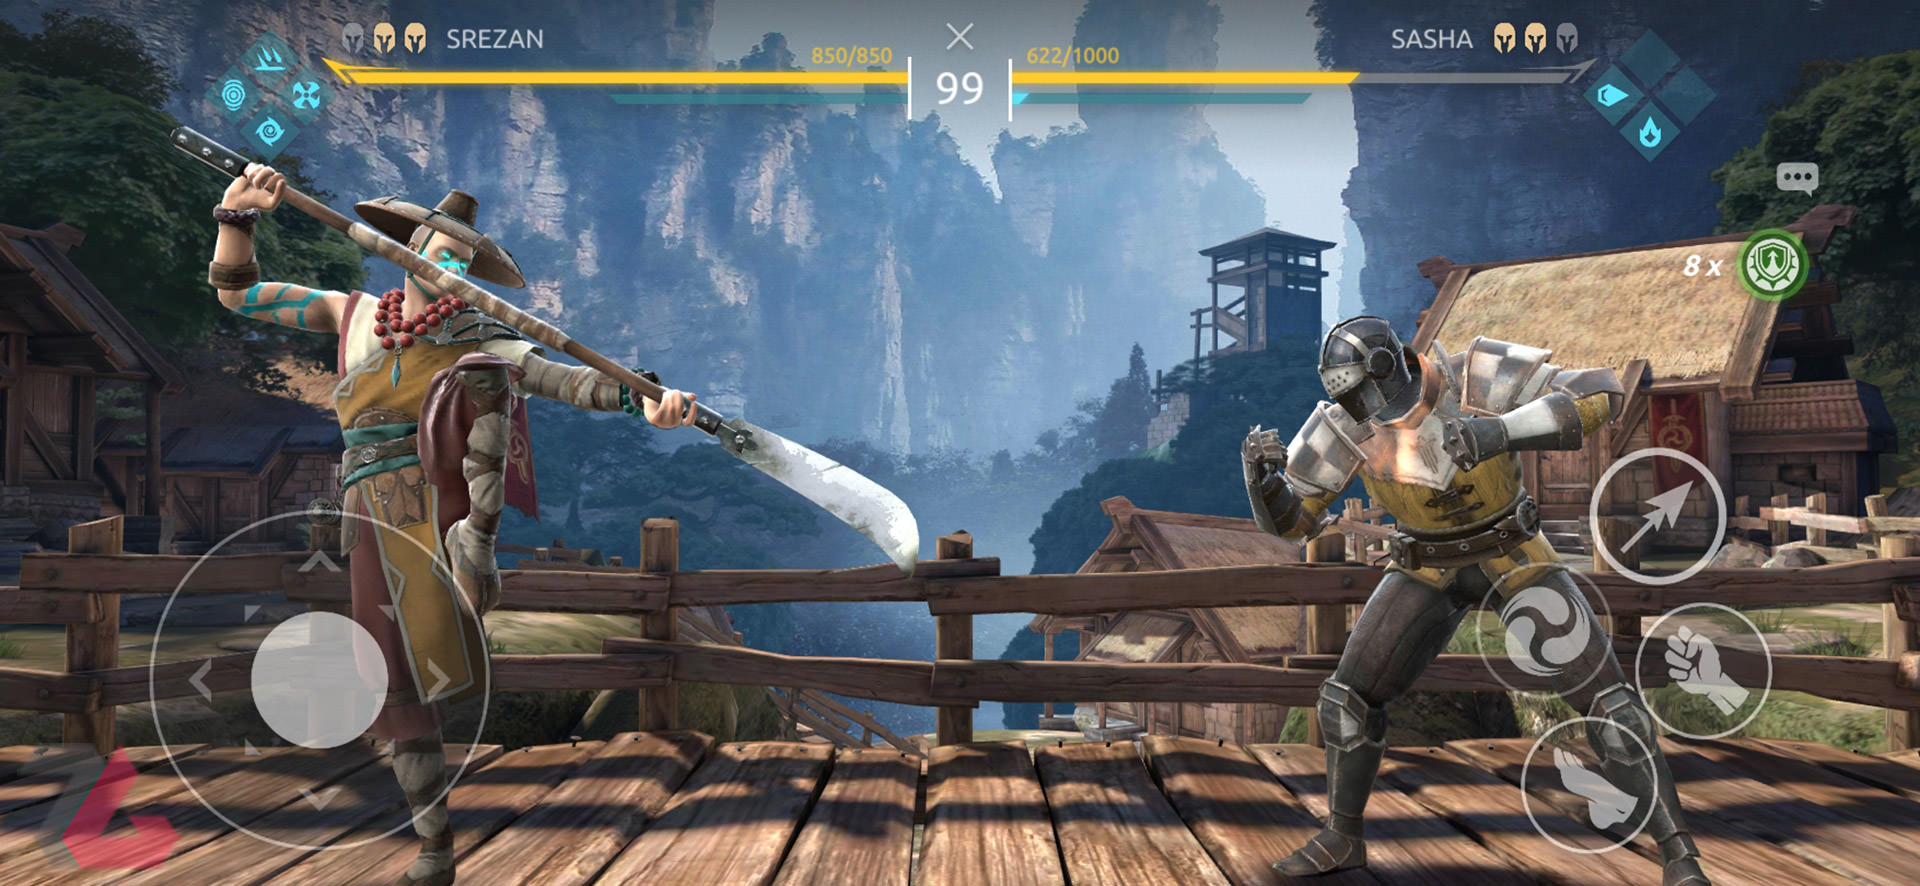 shadow fight 4 arena download download free